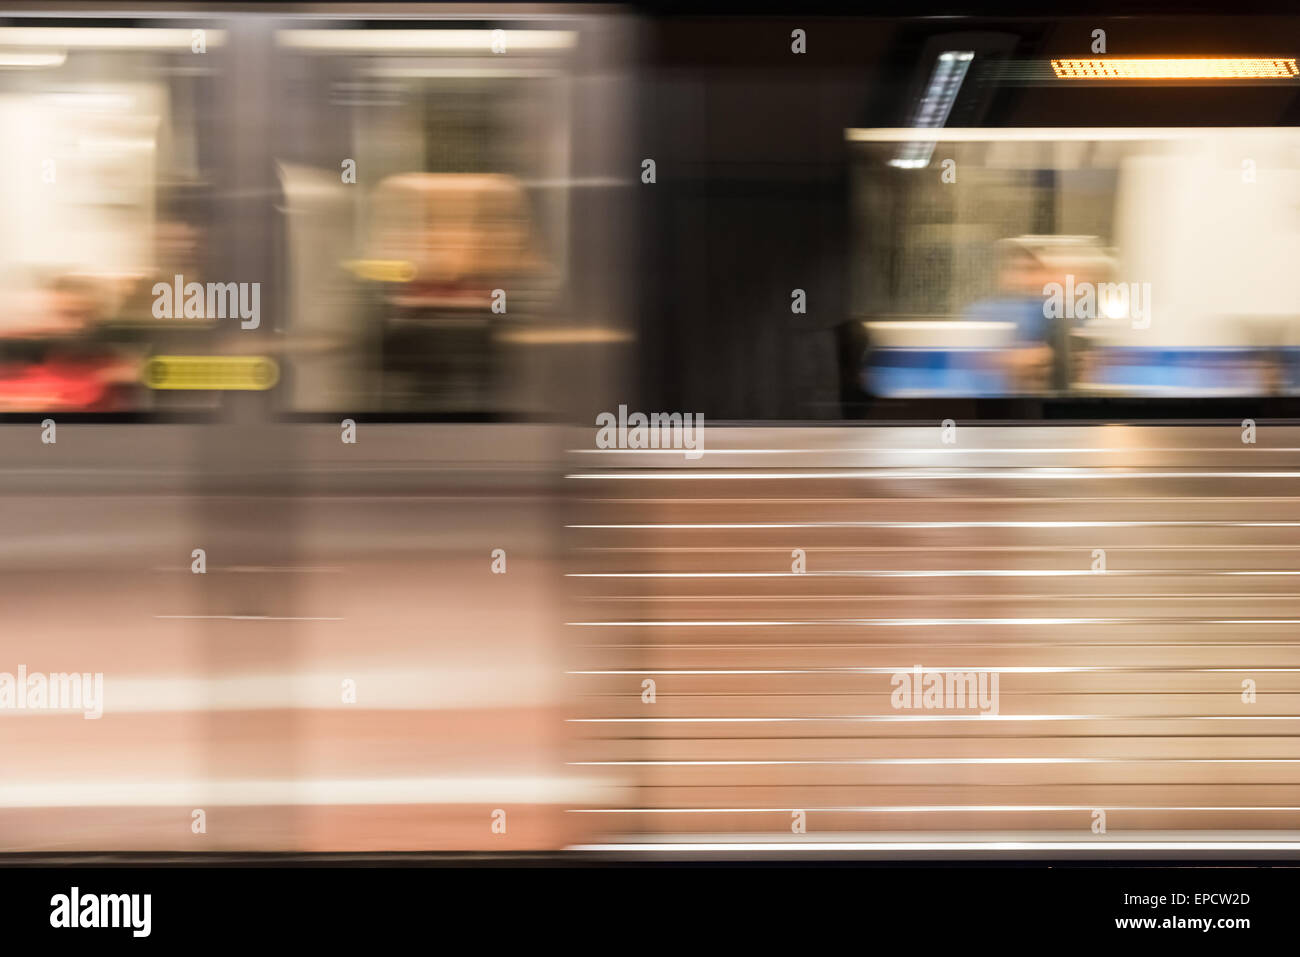 Moving Train In Subway Station Stock Photo